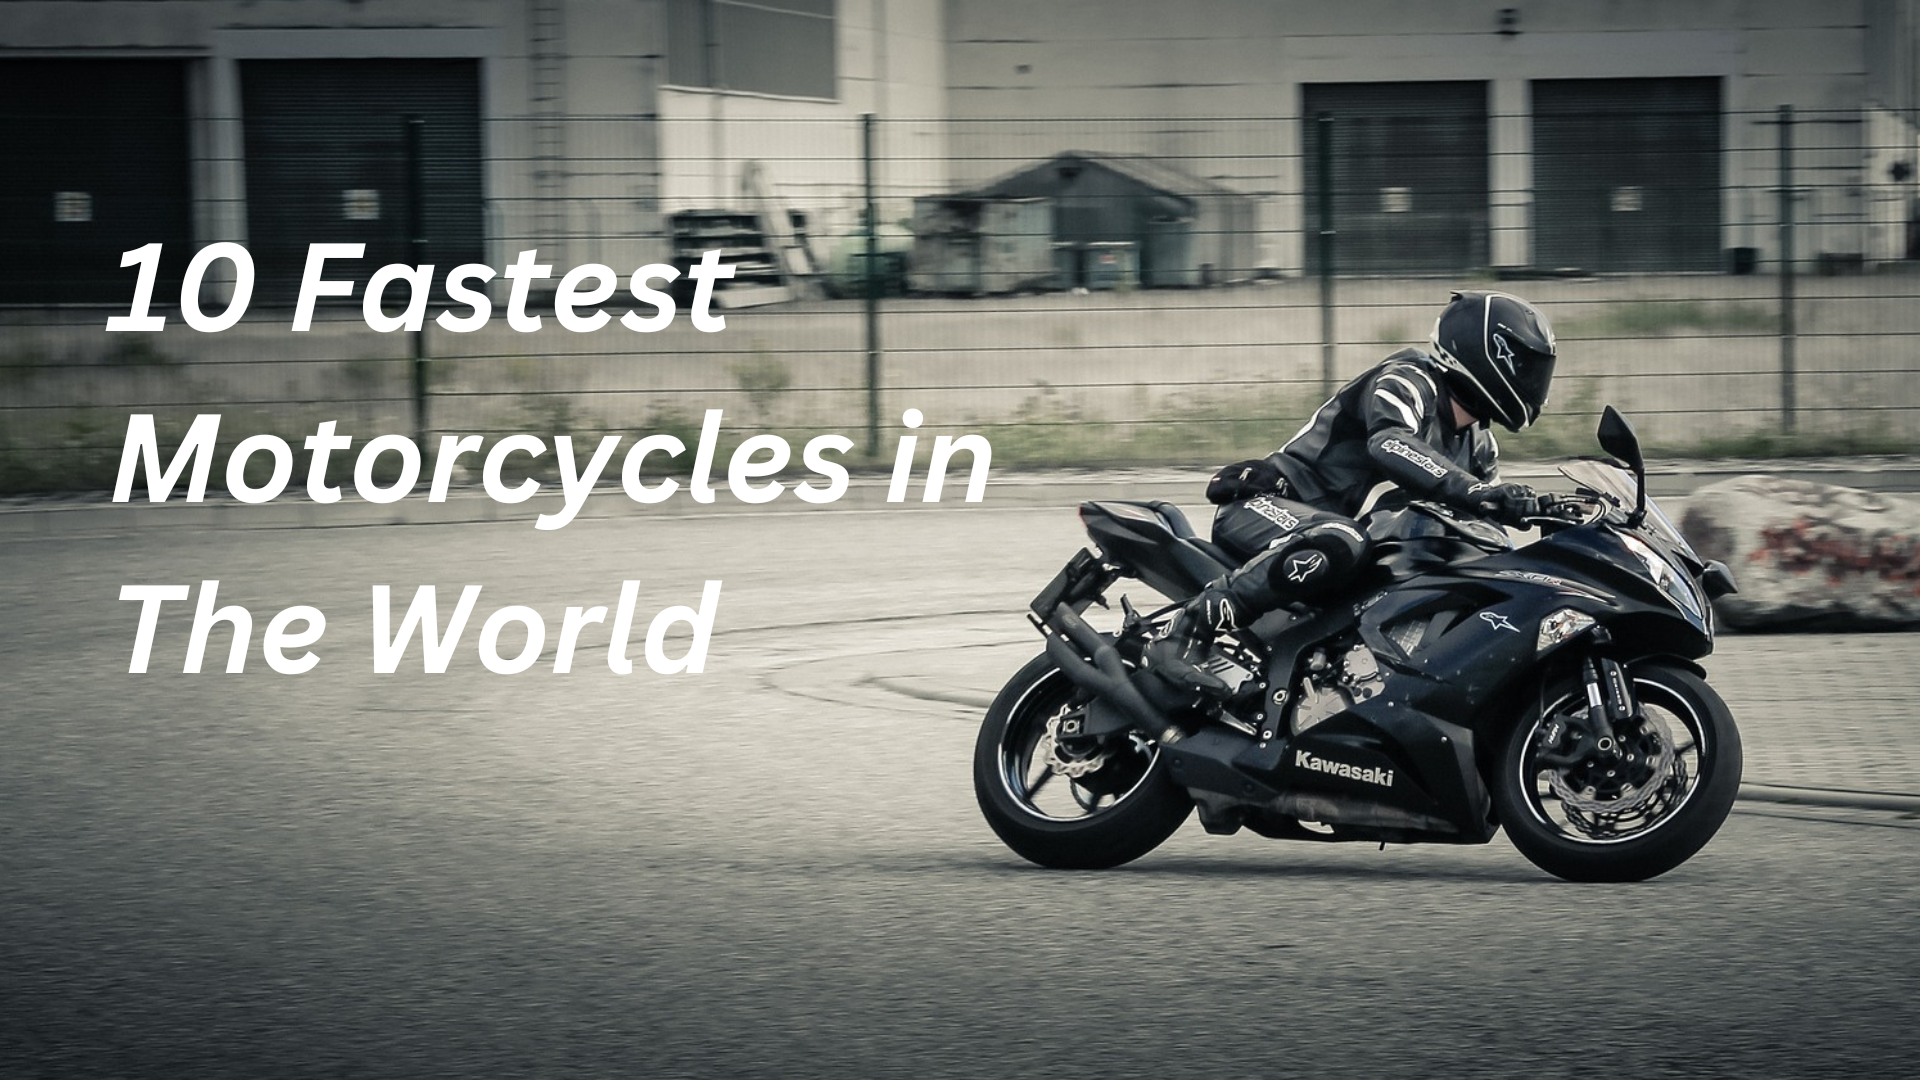 10 Fastest Motorcycles in The World